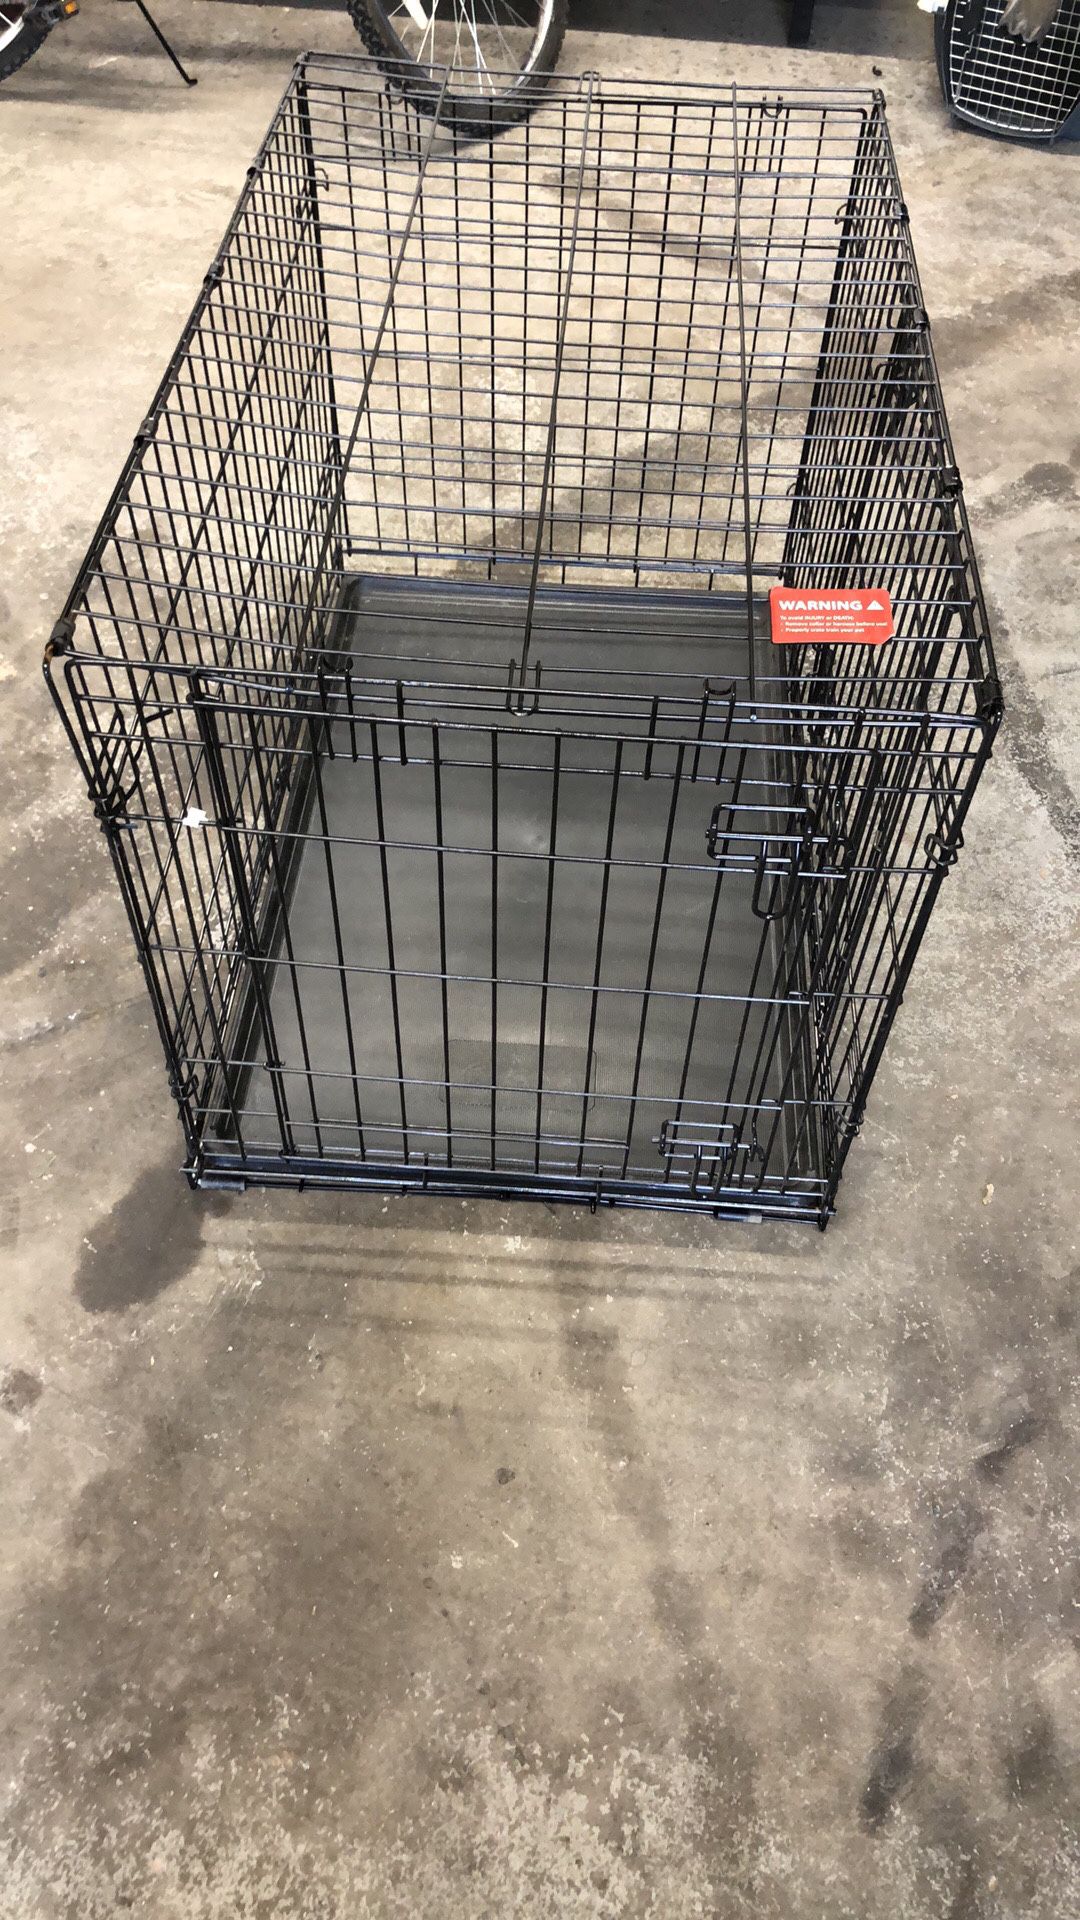 23x25x36 2 Doors Almost new dog cage